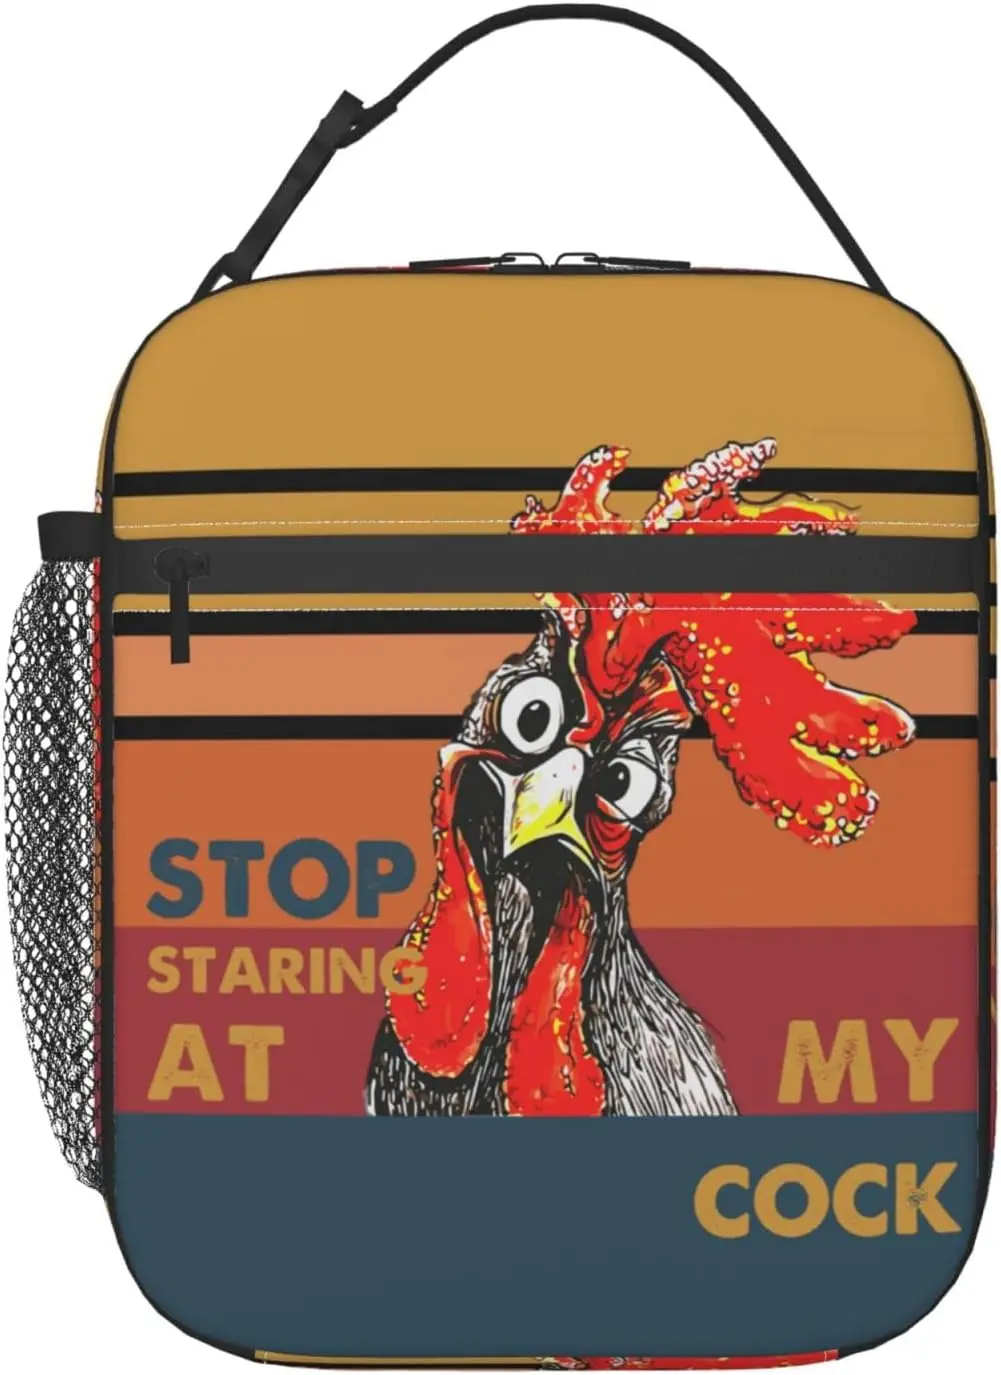 

Funny Rooster Insulated Lunch Bag for Men Women High-Density Oxford Cloth Waterproof Bento Bags Portable Thermal Lunch Box